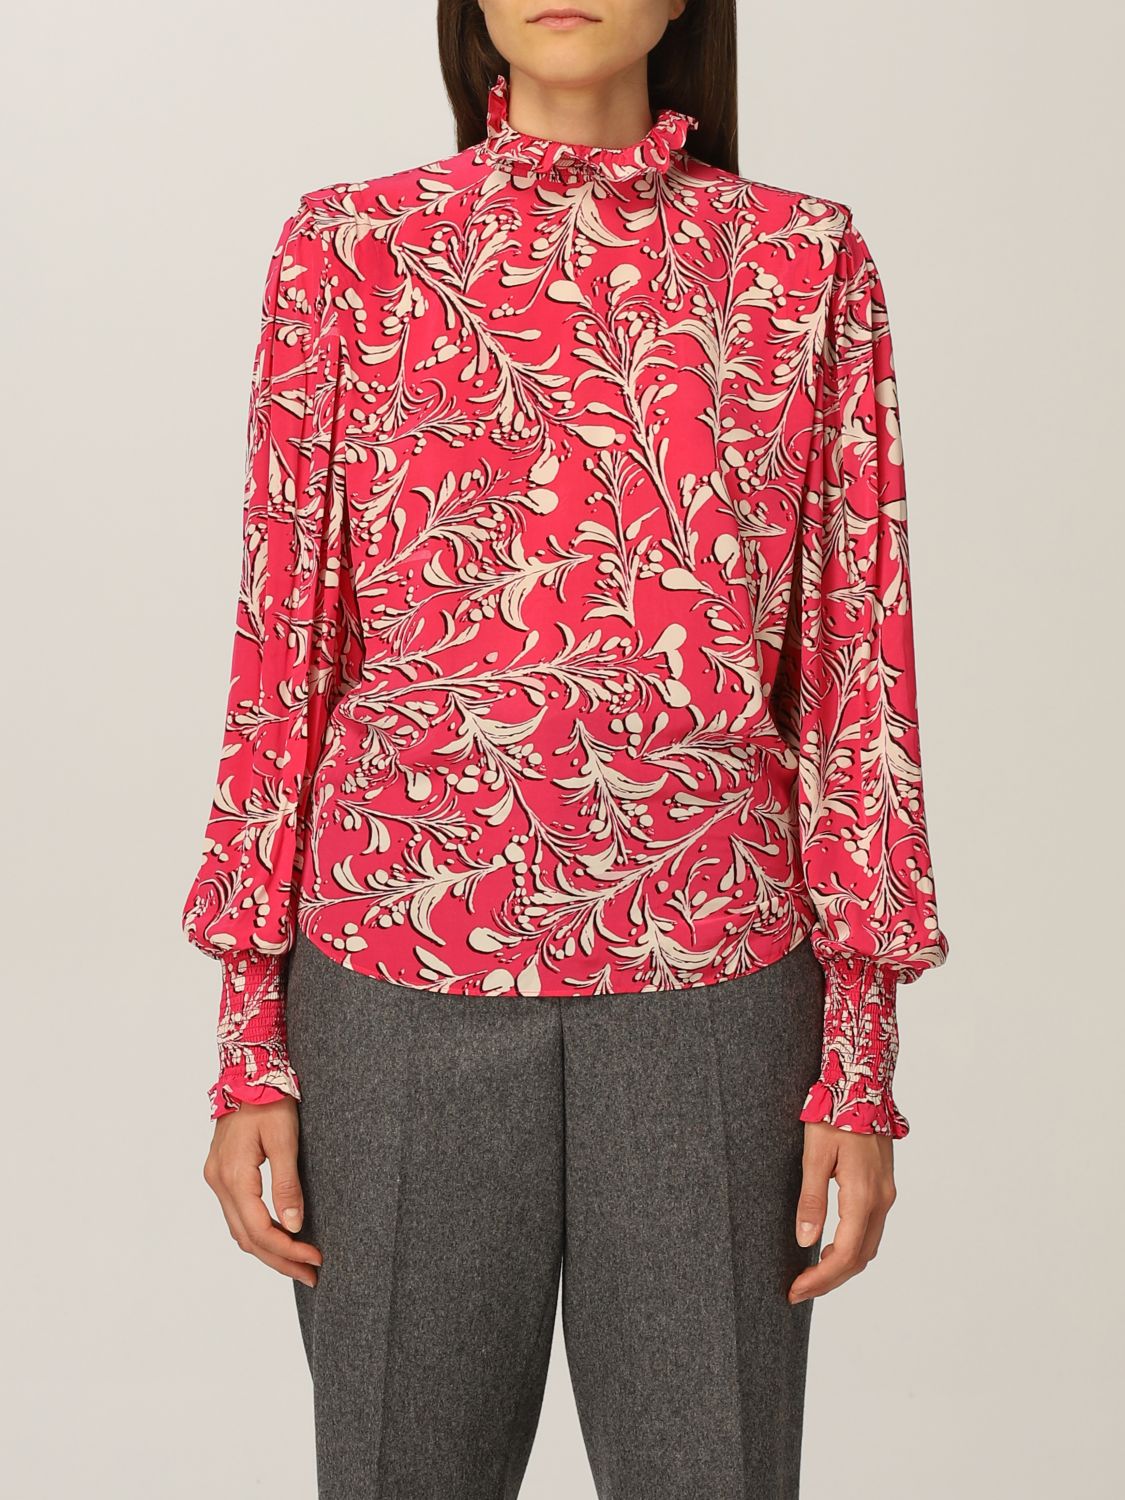 MARANT ETOILE: Yoshi blouse in viscose with floral print | Top Isabel Marant Etoile Women Pink | Top Isabel Marant Etoile HT149721A022E GIGLIO.COM